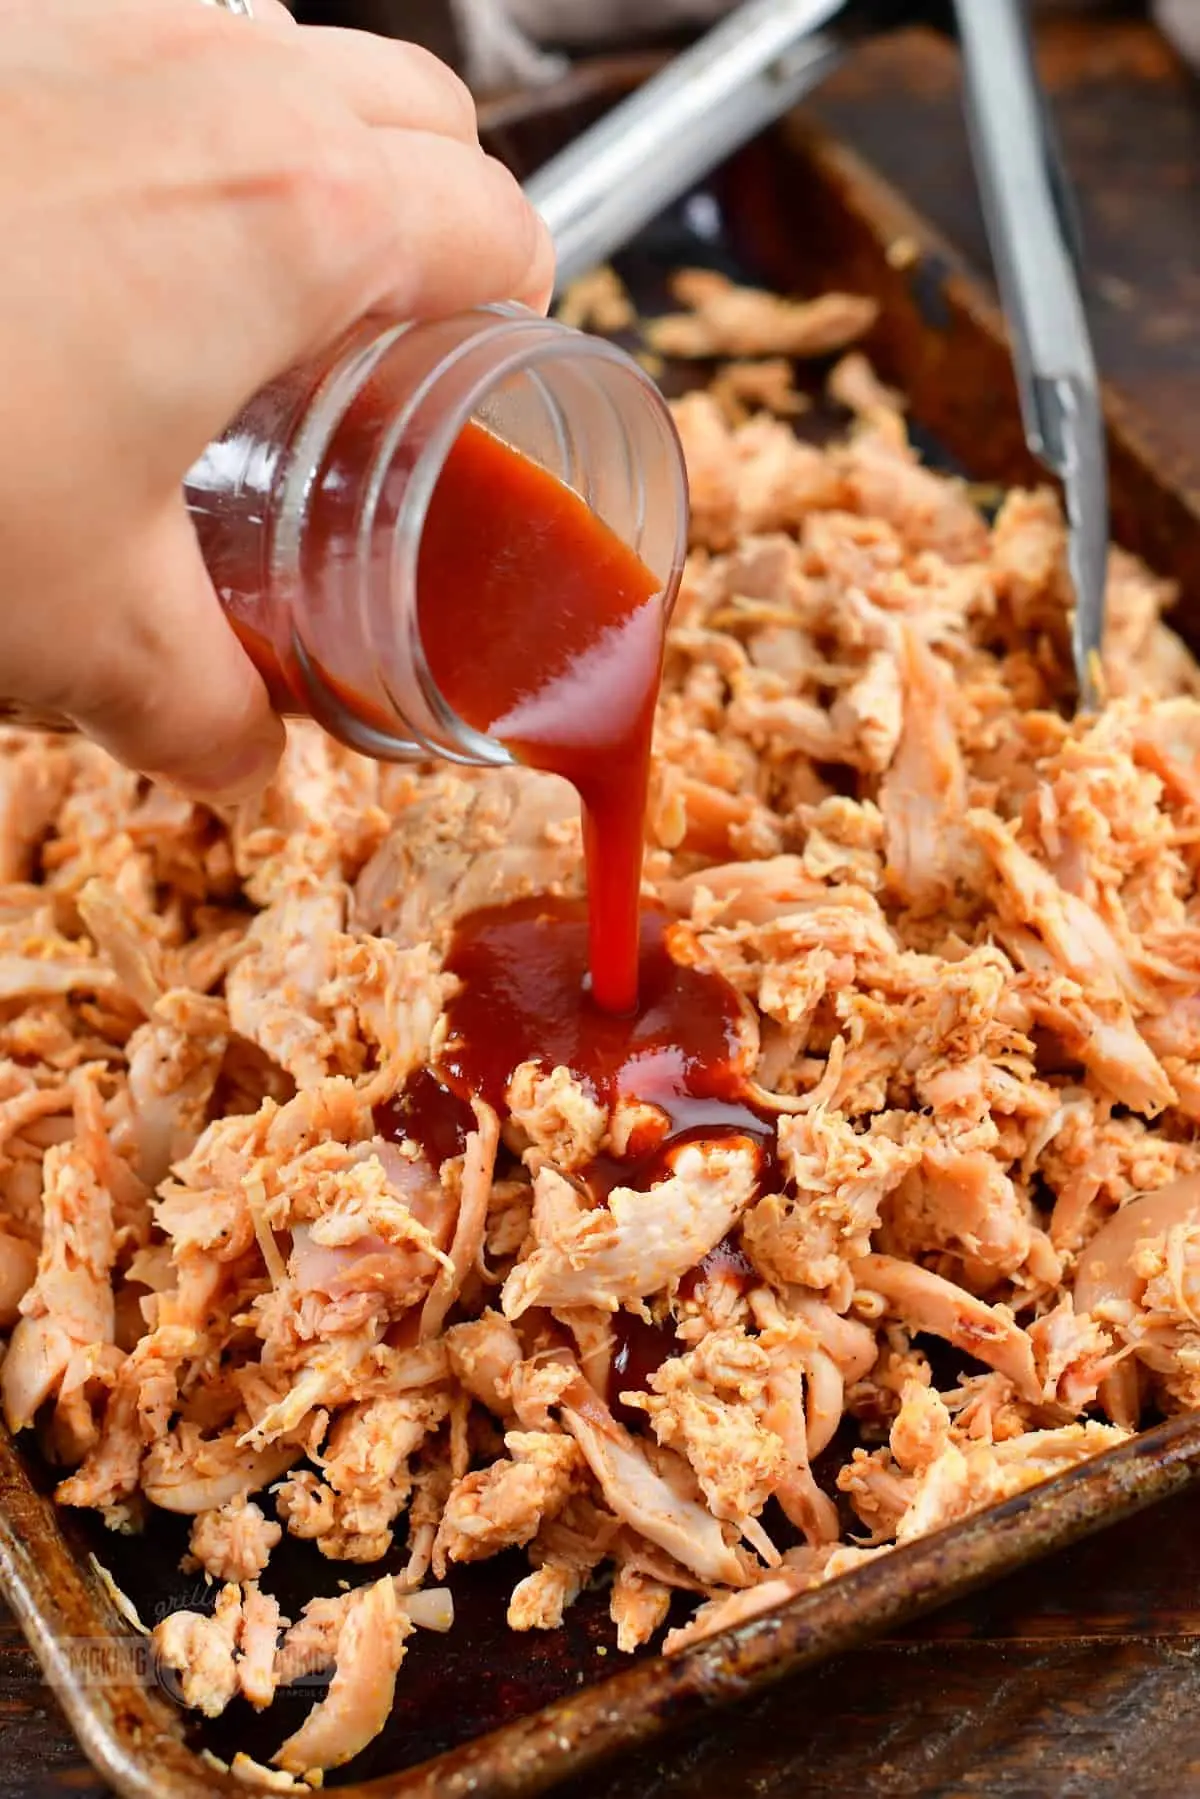 smoked shredded chicken - What is the best cut of chicken to smoke